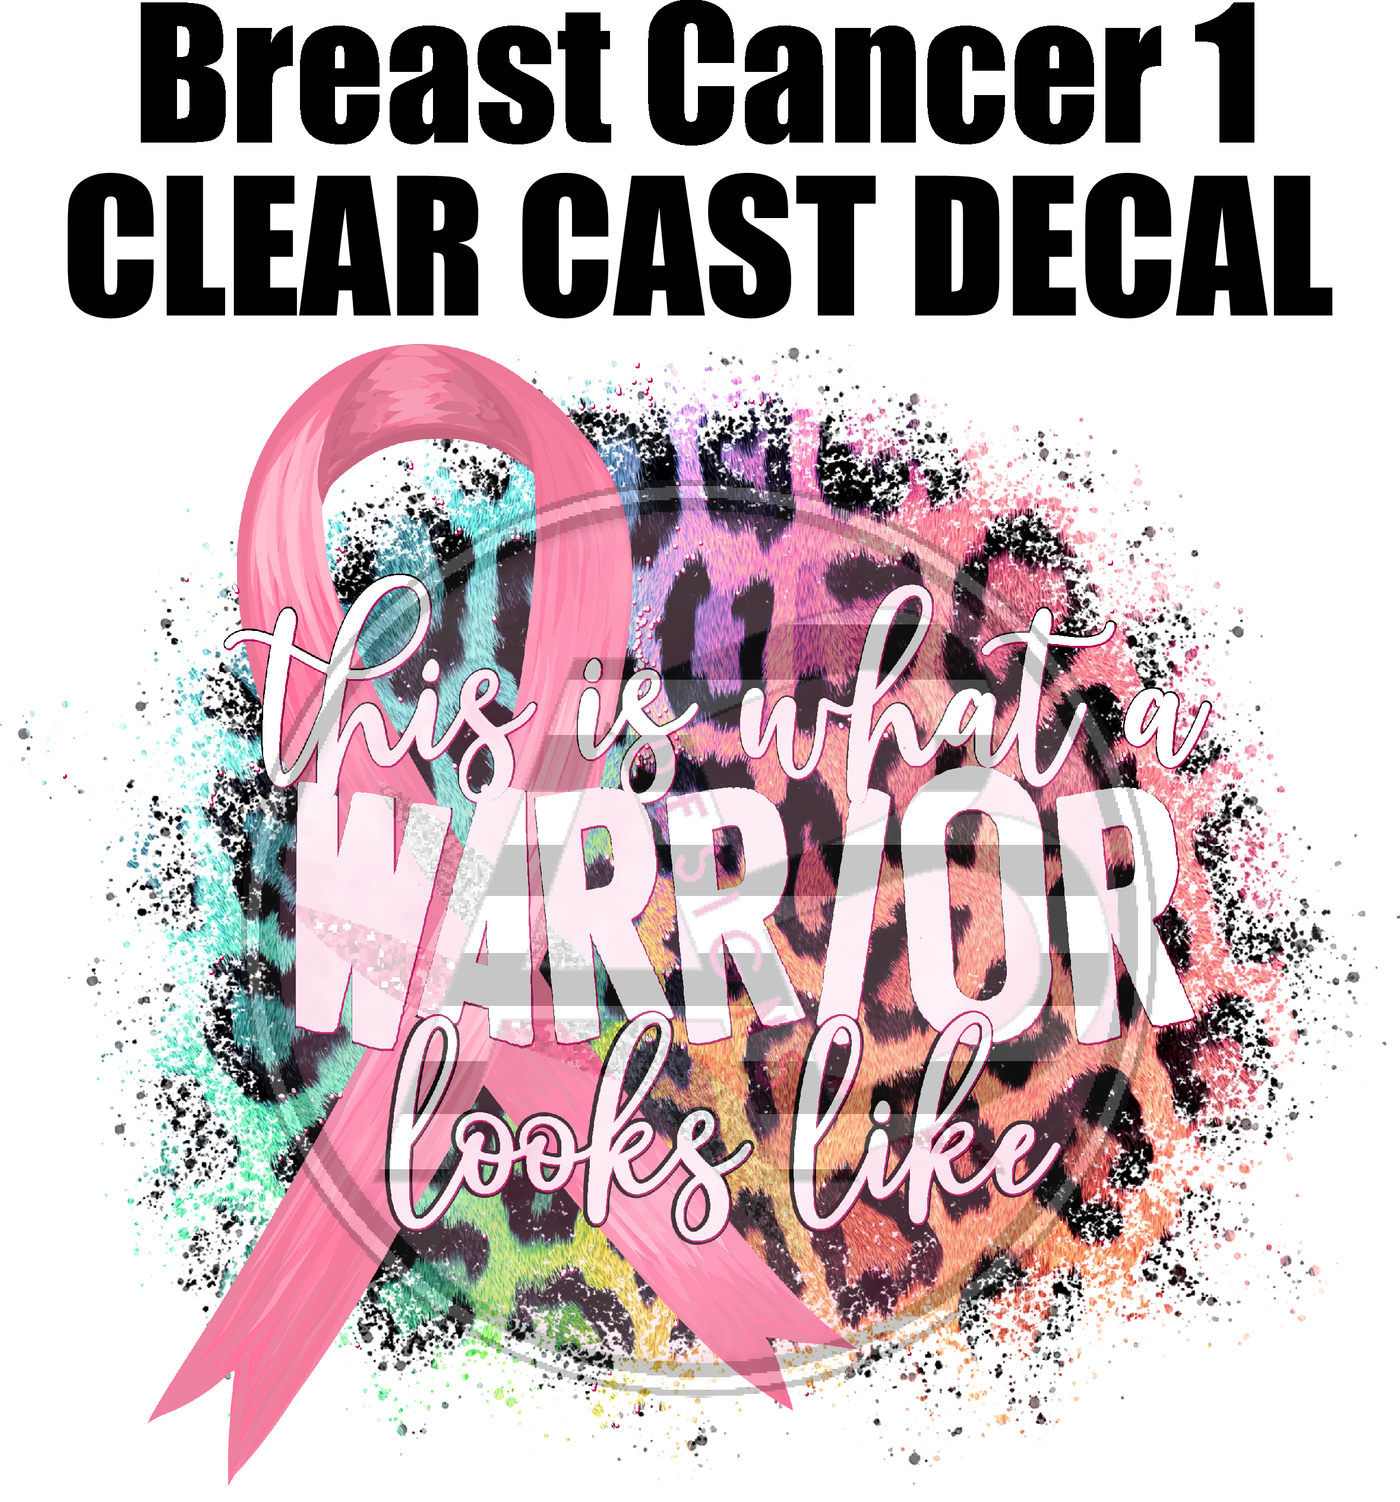 Breast Cancer 1 - Clear Cast Decal